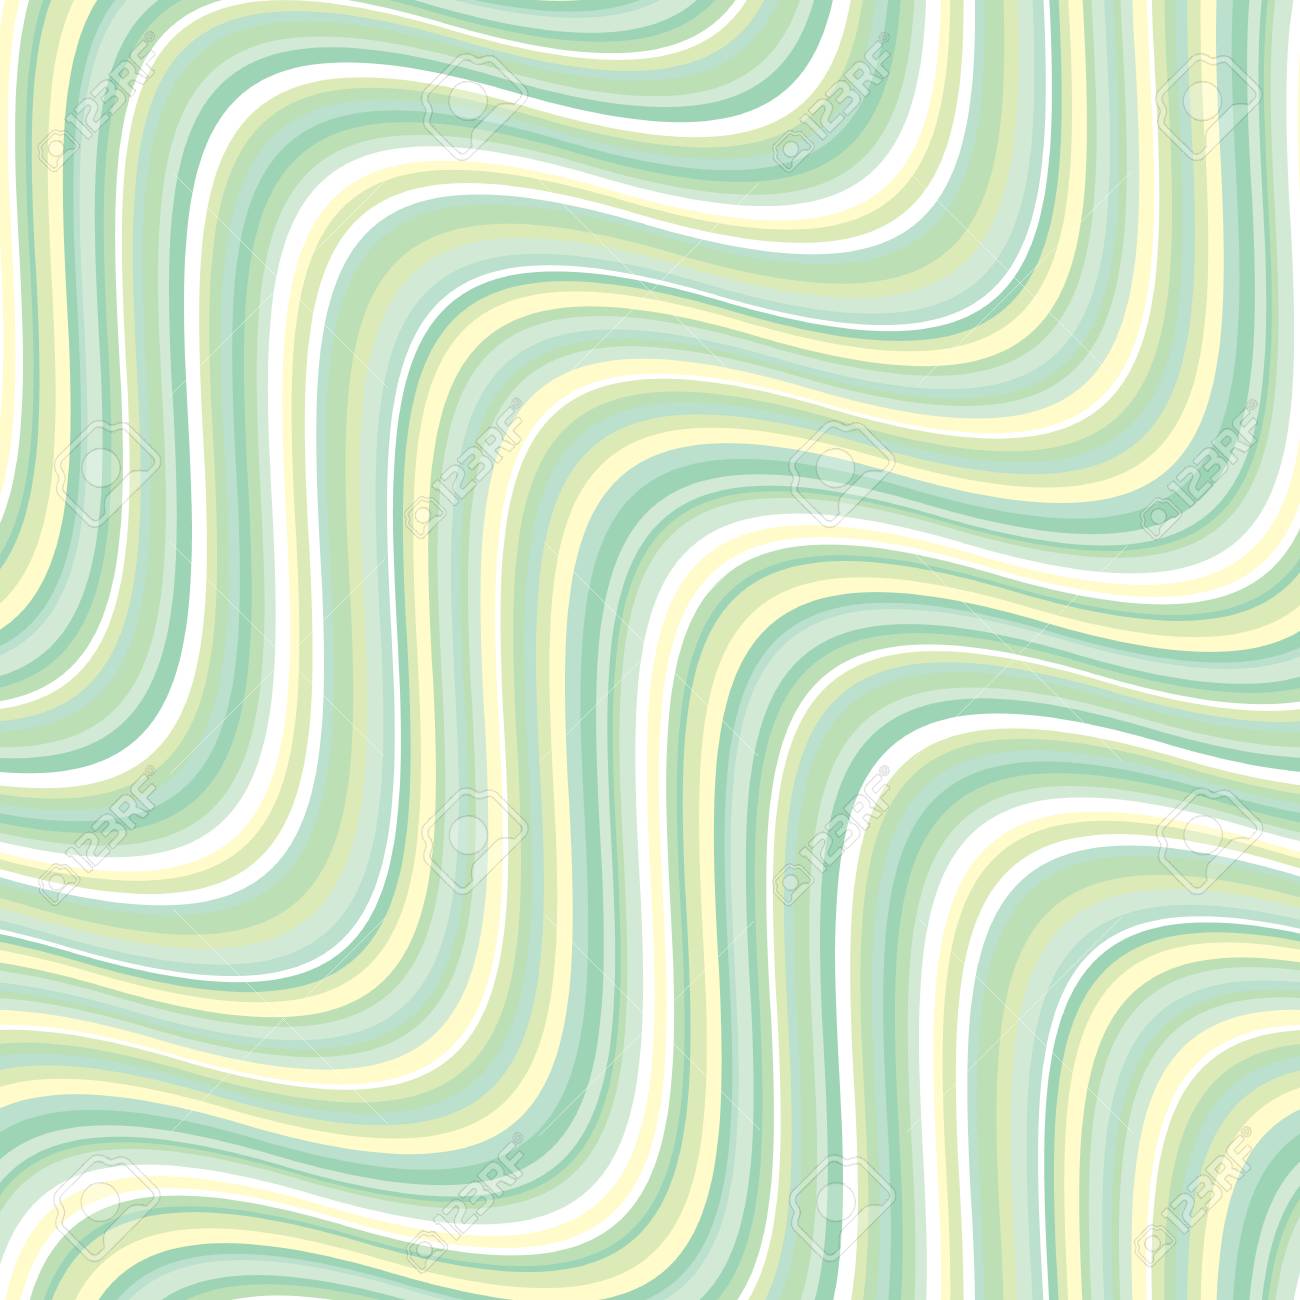 Vintage 60s Style Pale Green Stripes Seamless Pattern In